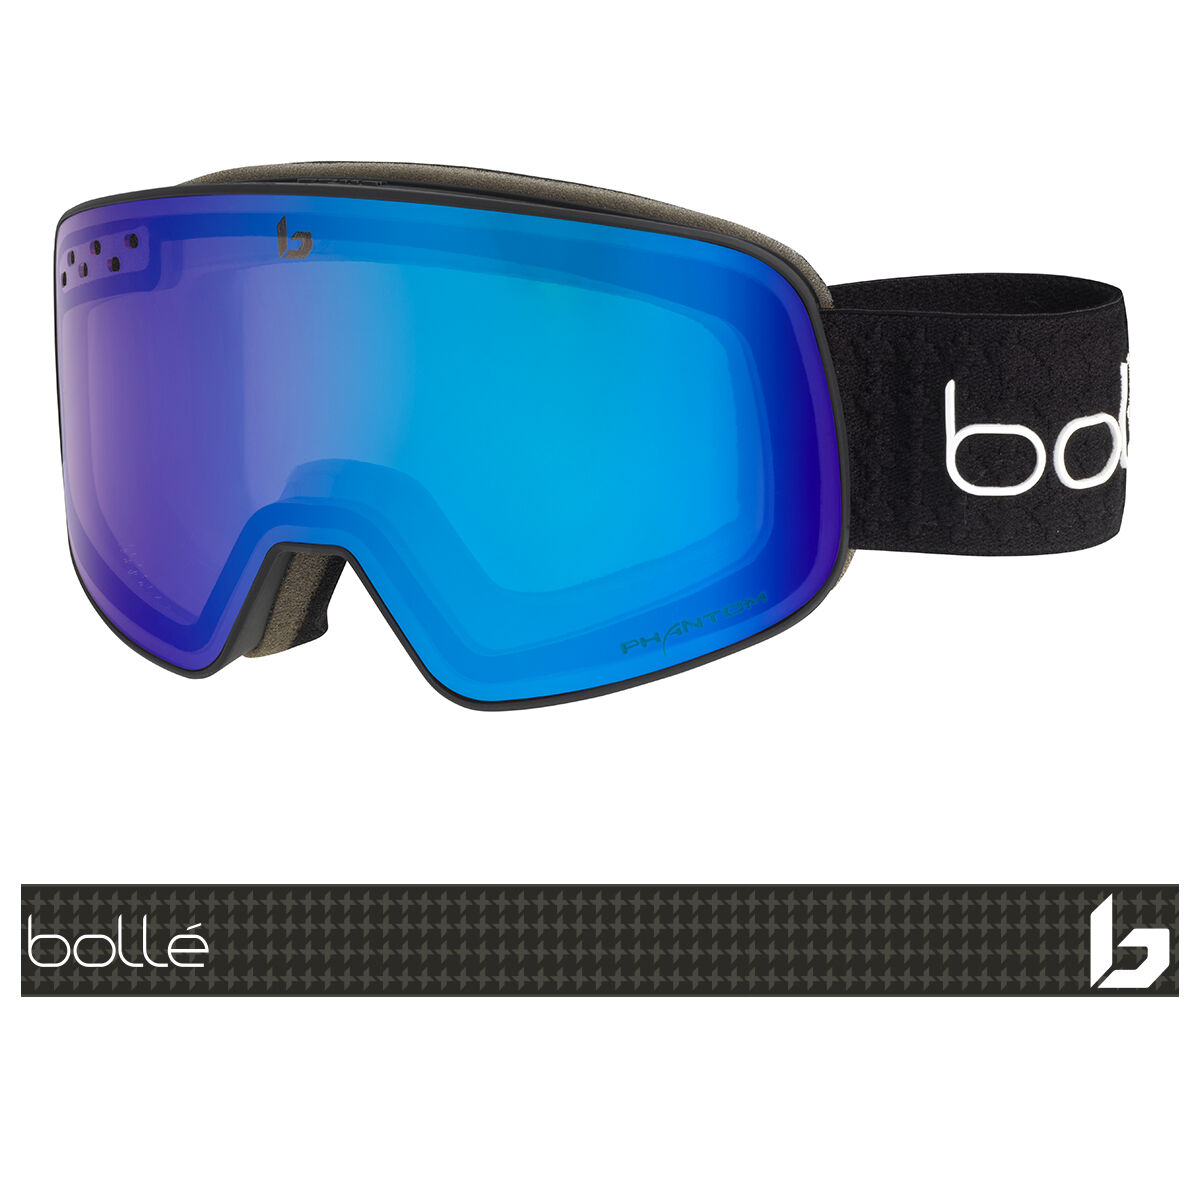 Bolle Snowboard/Ski Goggles with Bonus Storm Lens ~ New & Factory Sealed! 